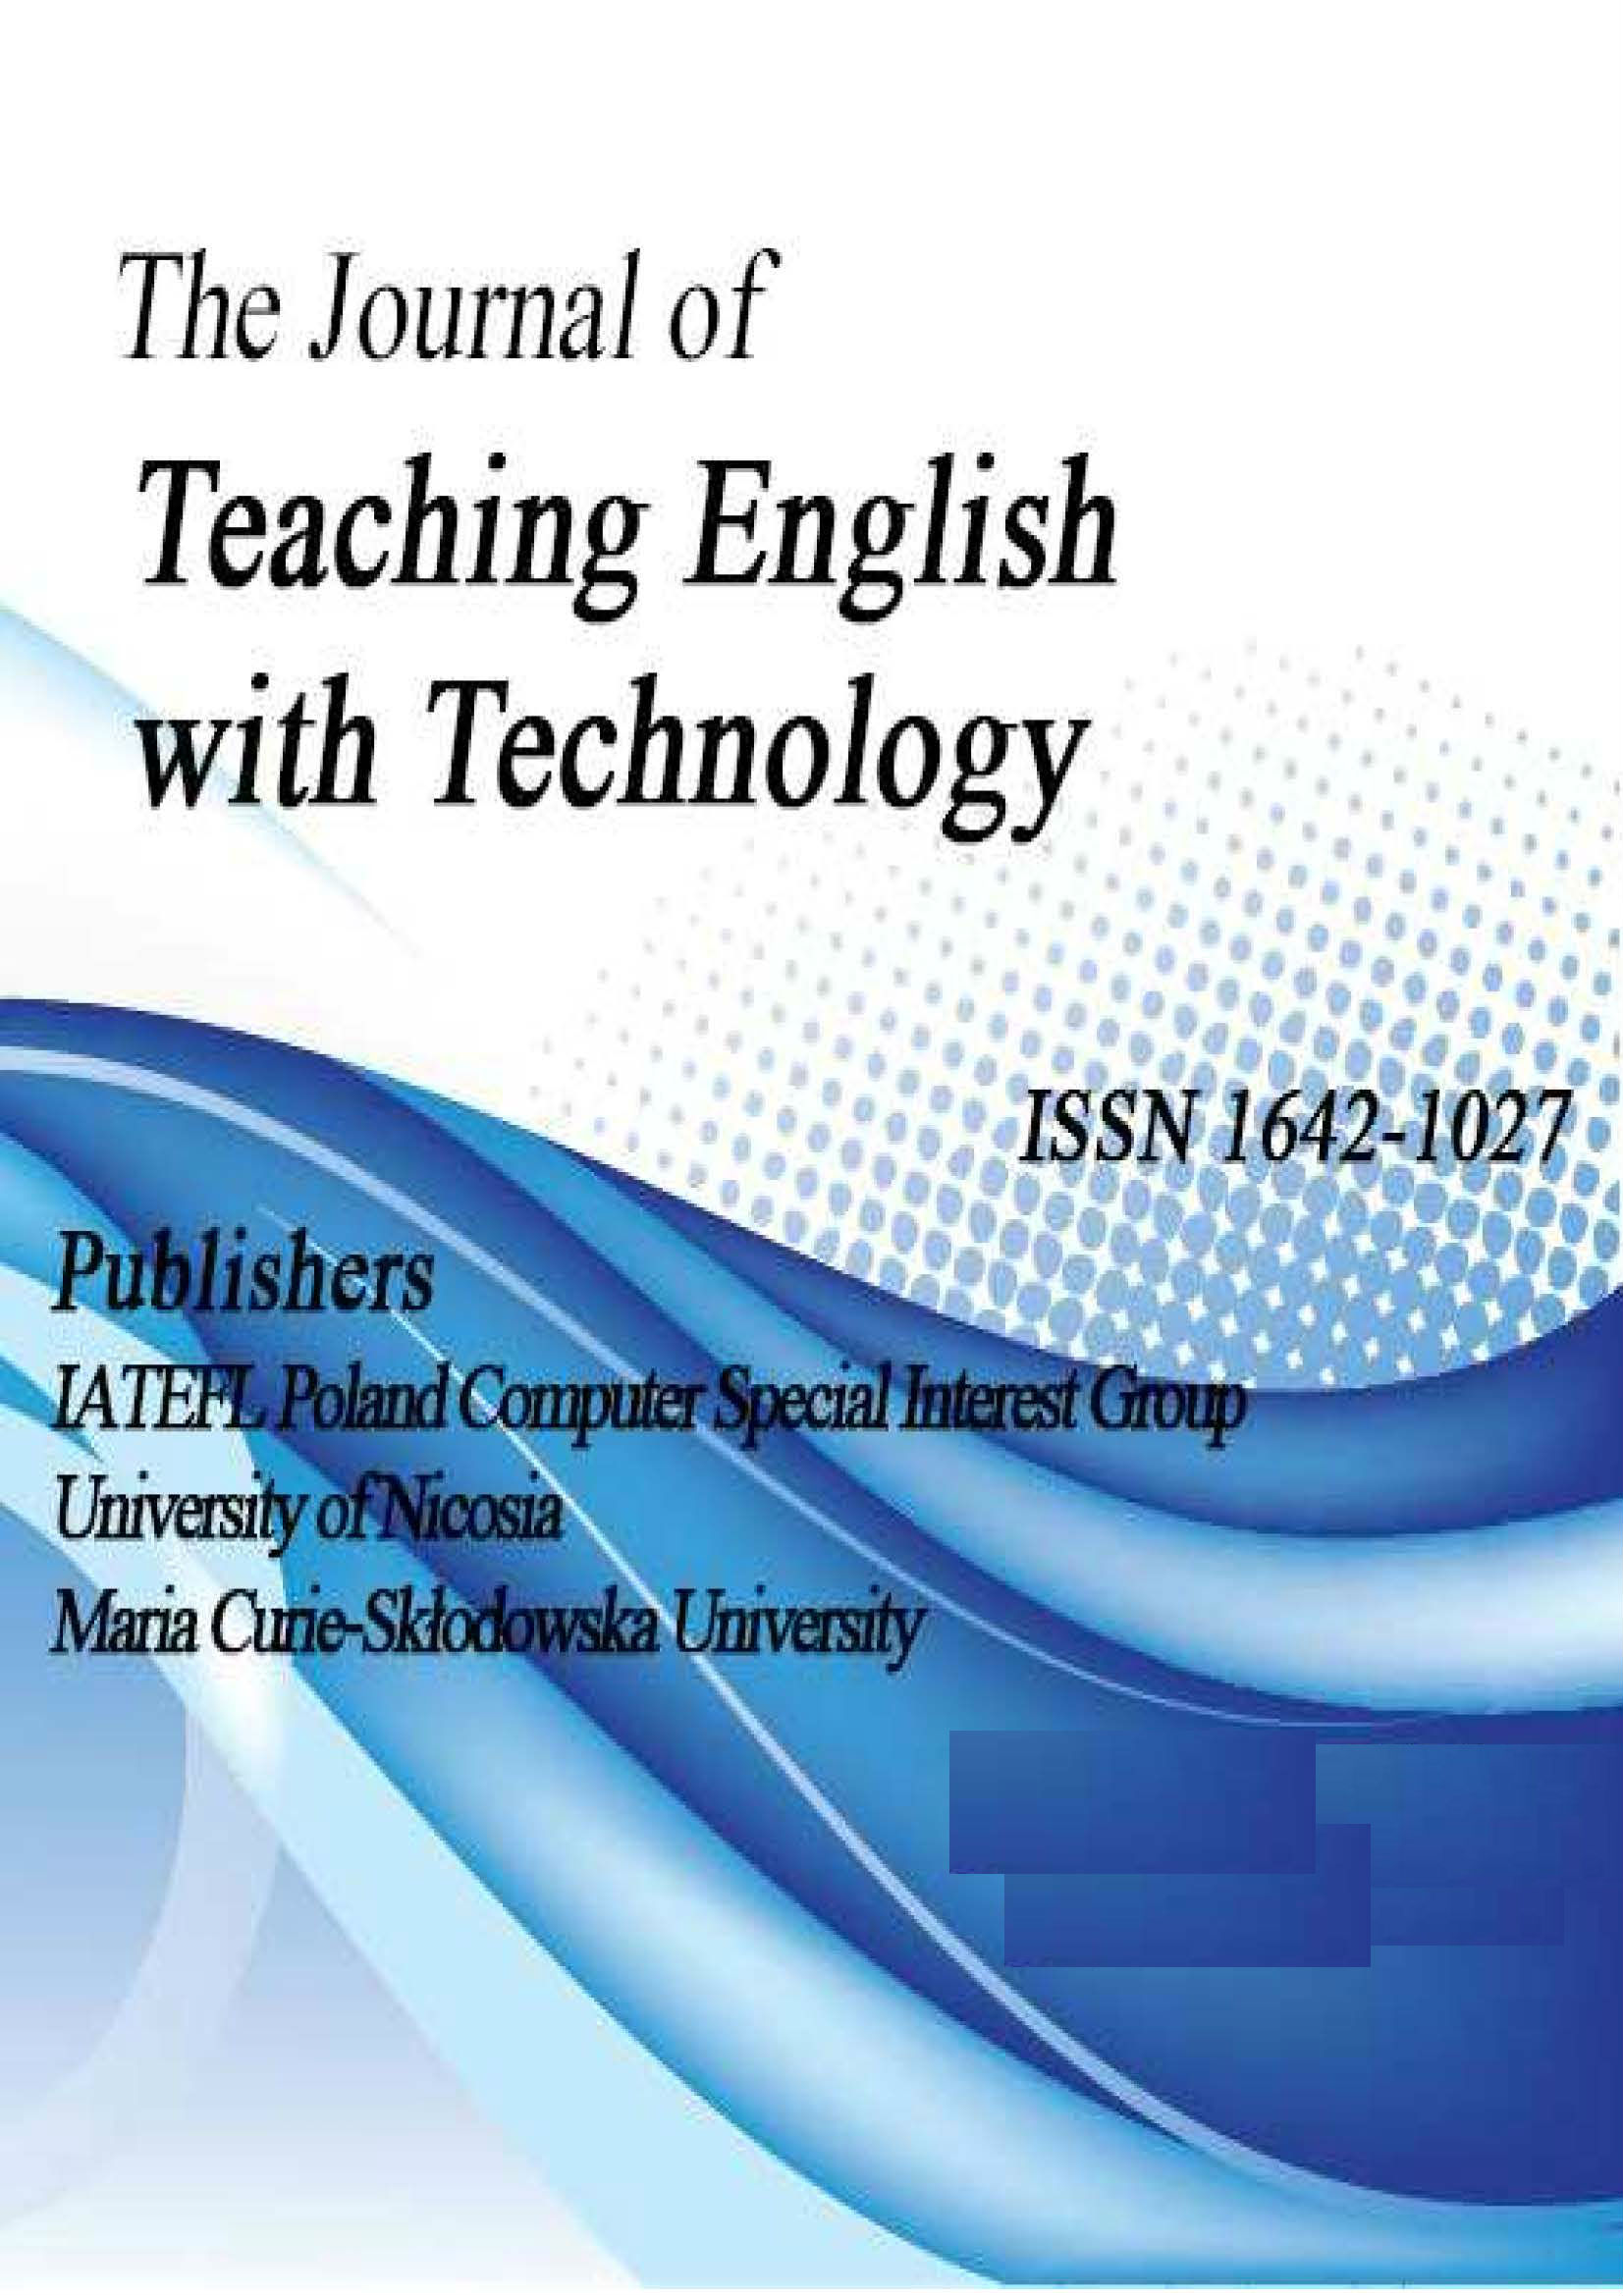 DEVELOPING ONLINE LANGUAGE TEACHING. RESEARCH-BASED PEDAGOGIES AND REFLECTIVE PRACTICES - BOOK REVIEW Cover Image